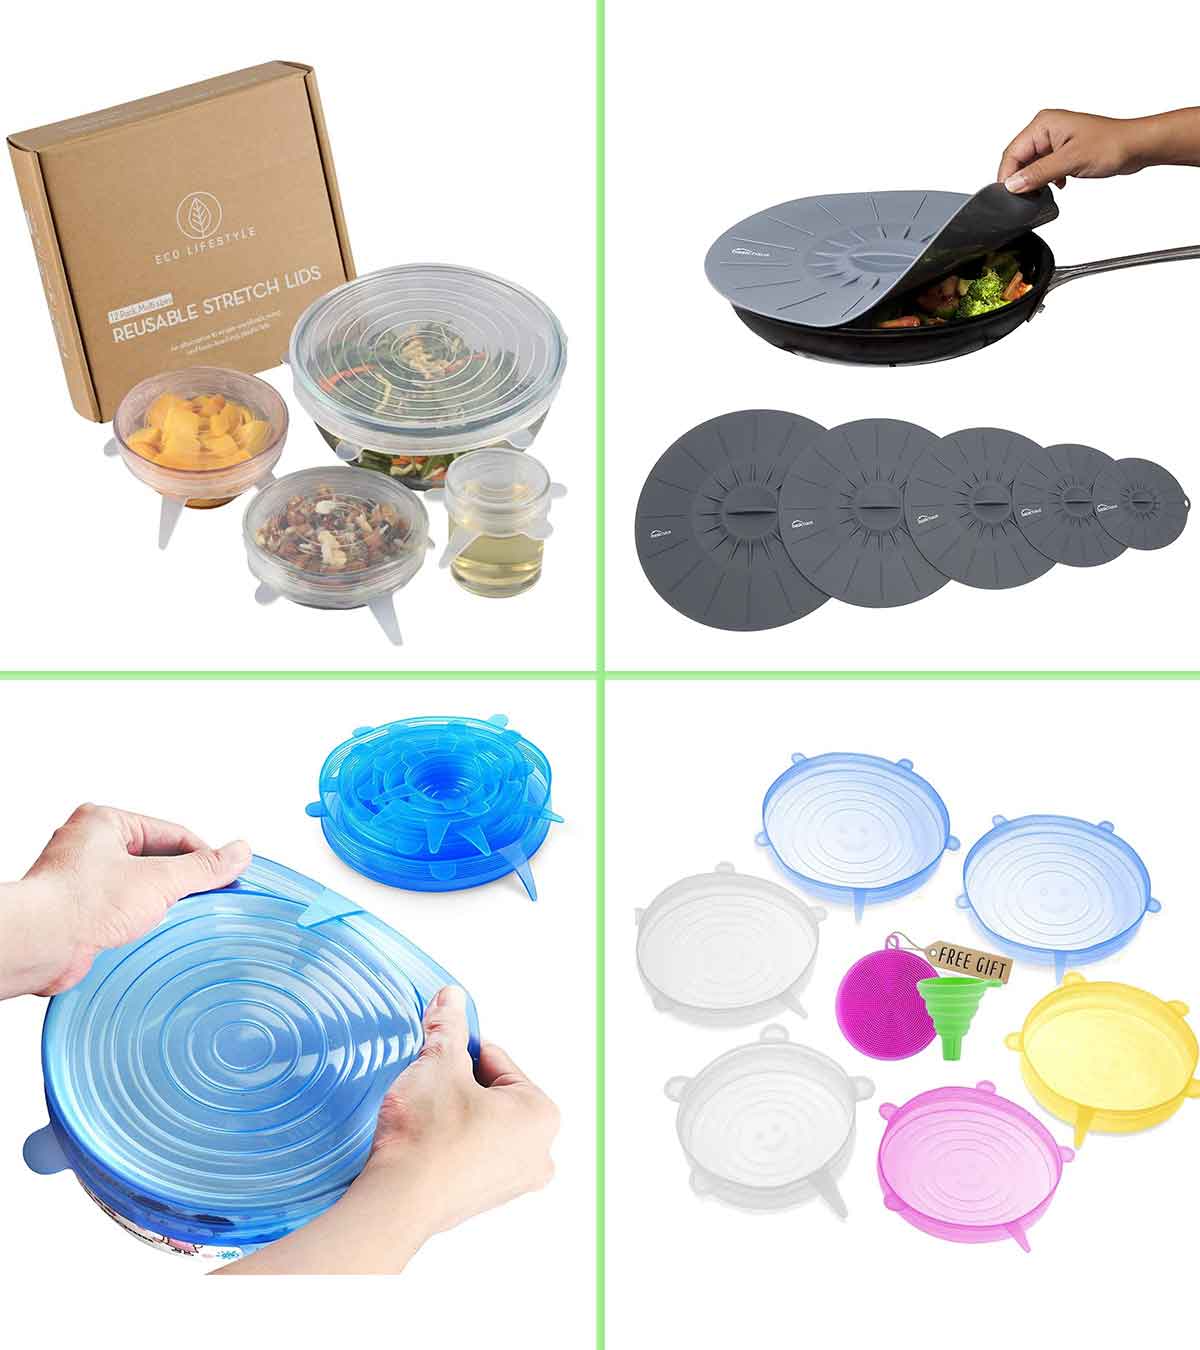 Silicone Stretch Lids Reusable Silicone Lid-12Pcs Storage Covers Microwave and Dishwasher Safe Silicone Suction Lids BPA Free-Reusable Bowl Cover Durable Expandable Lids for Cans 